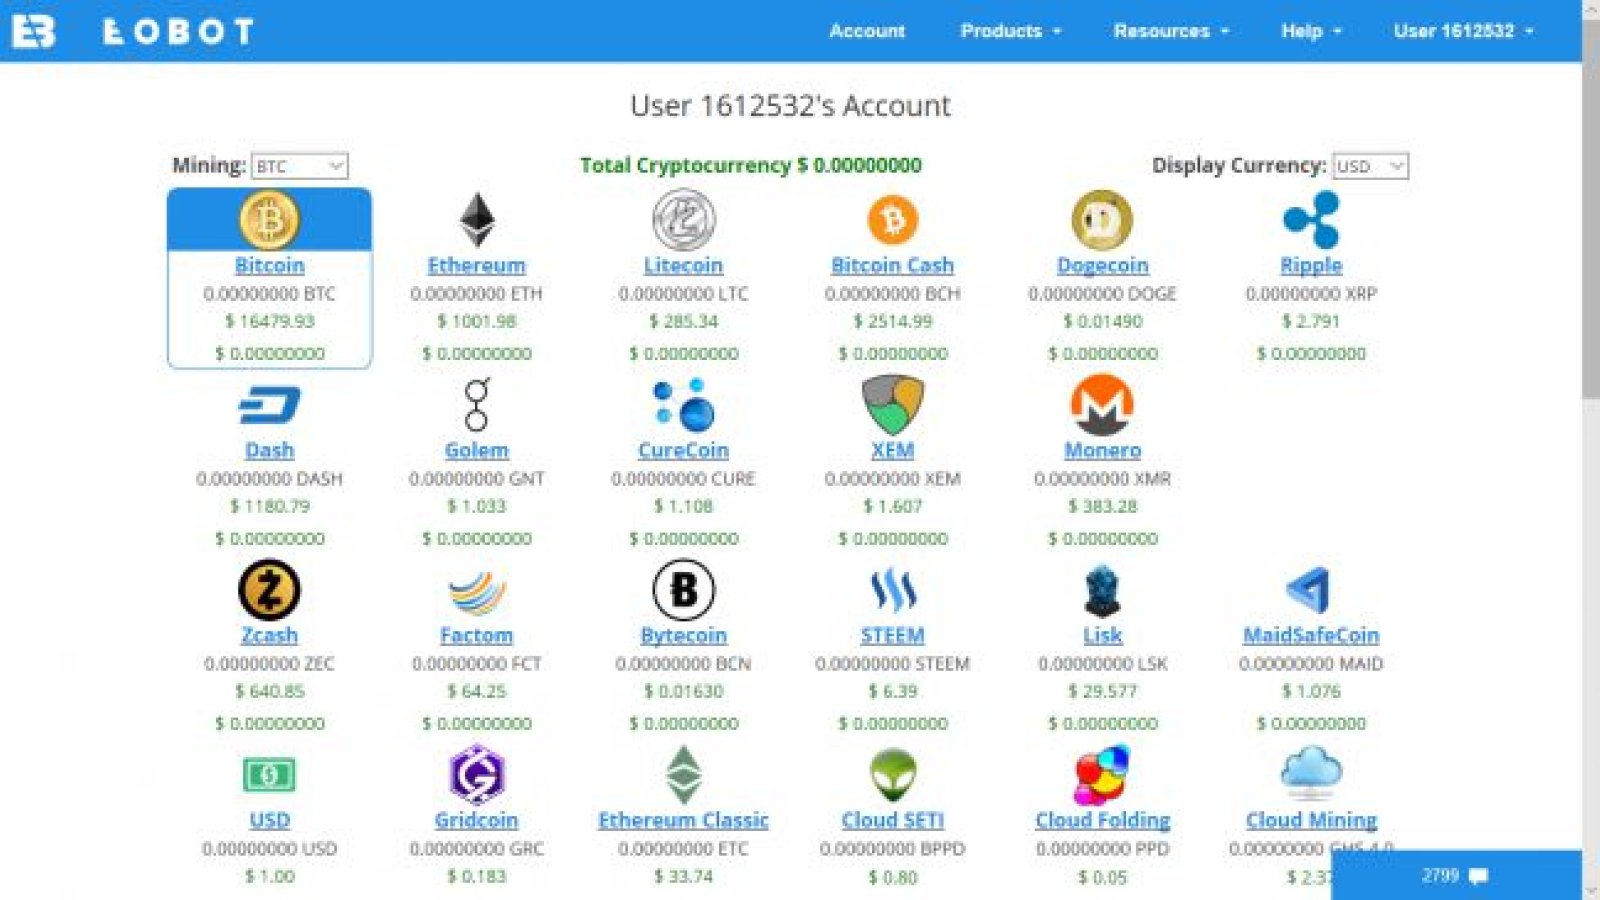 Available cryptocurrency on Eobot